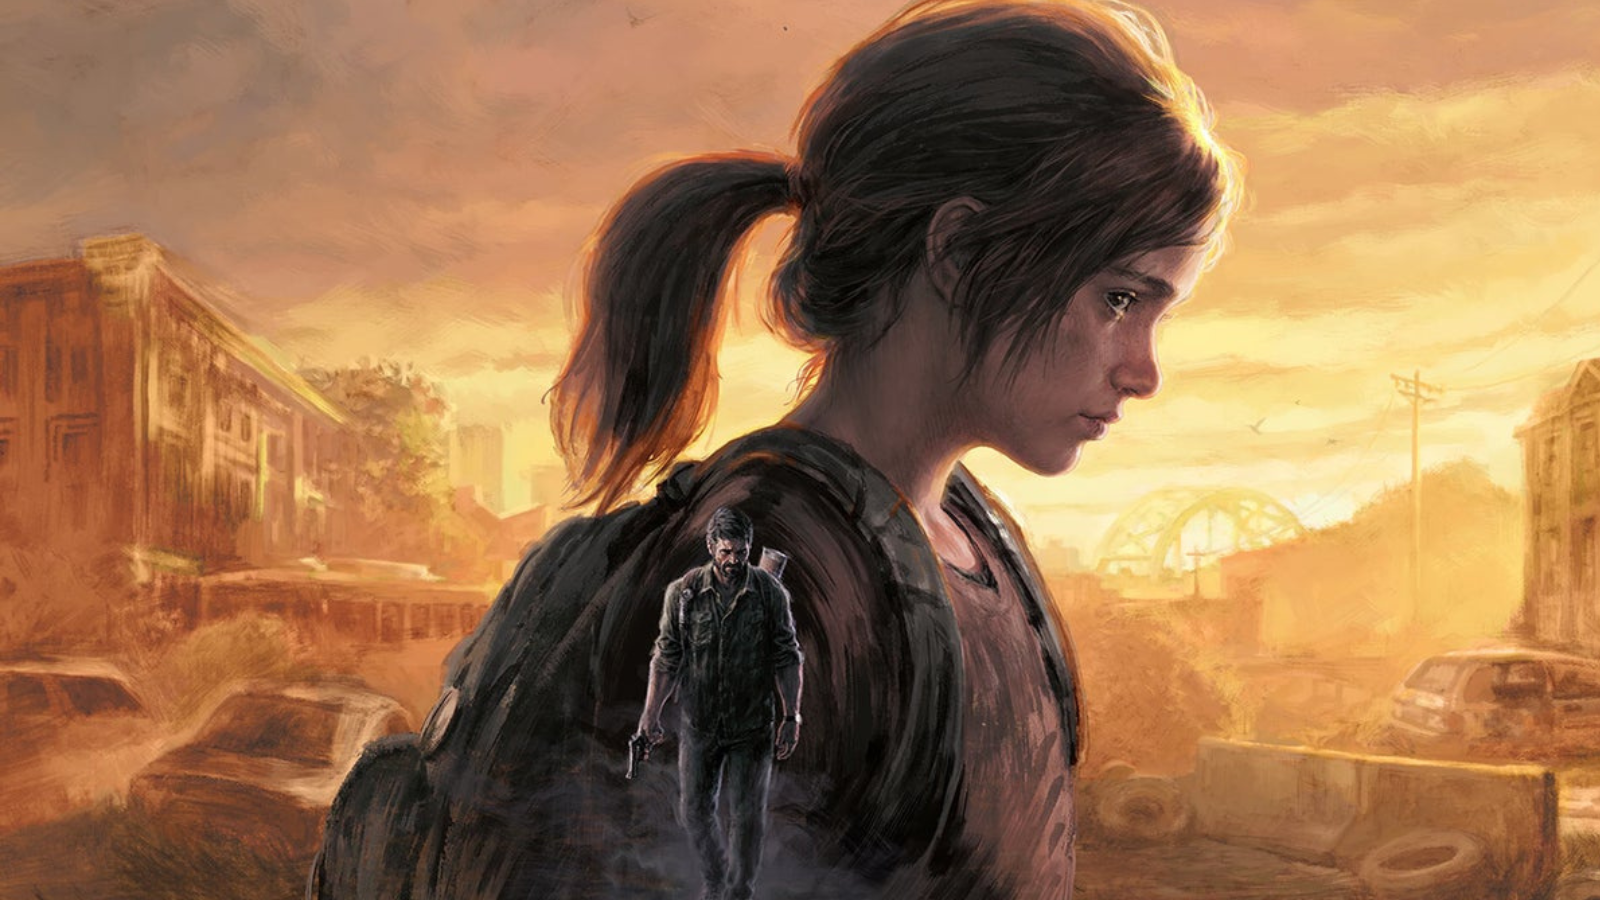 Play The Last of Us Part One for the First Time on PC